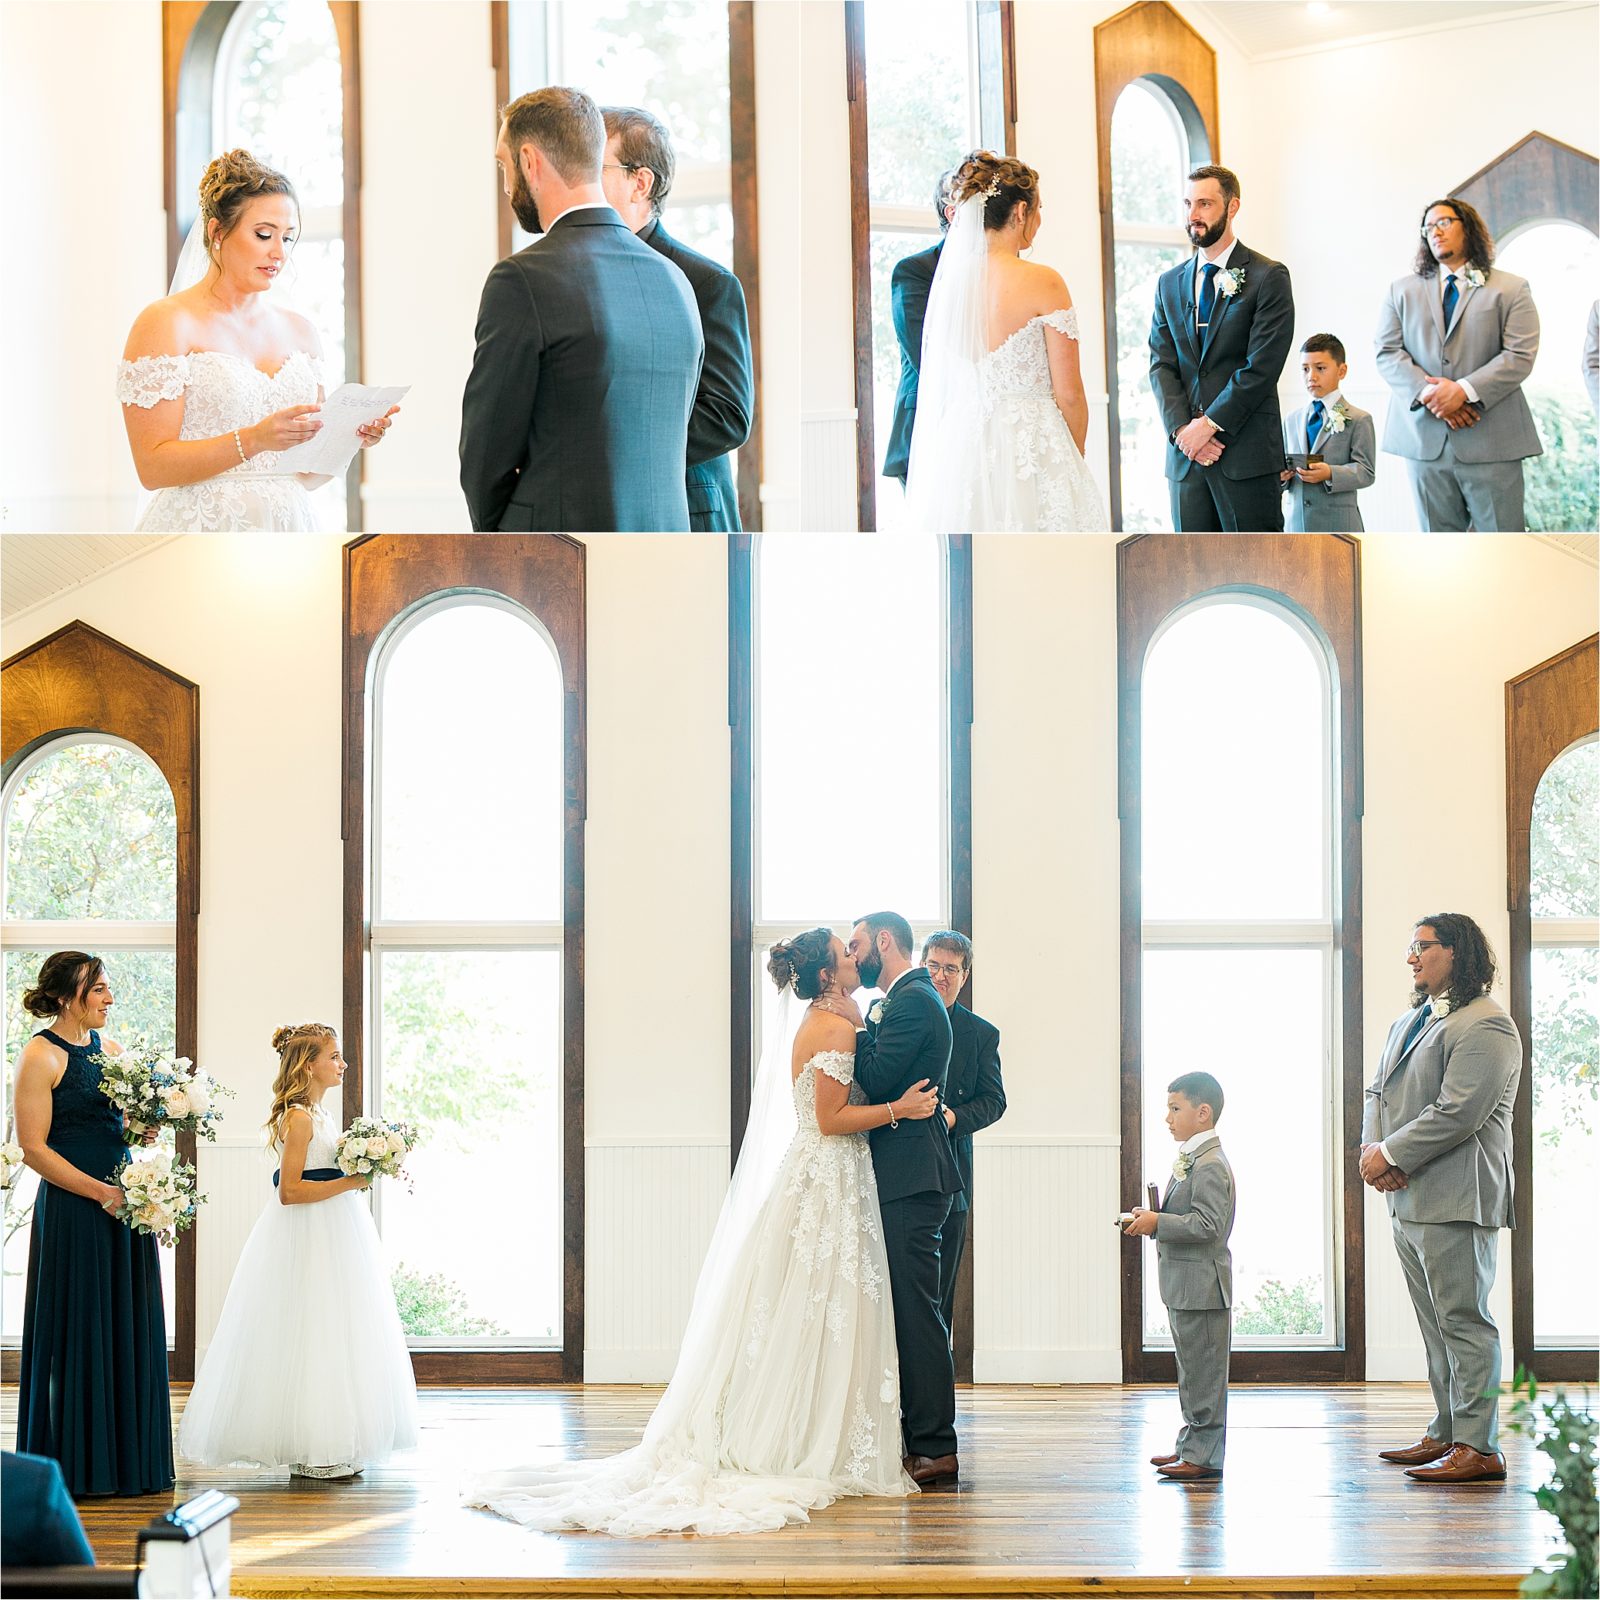 A bride and groom exchange their vows and share their first kiss as husband and wife during their White Chapel wedding ceremony at Rustic Grace Estate just outside of McKinney, TX 